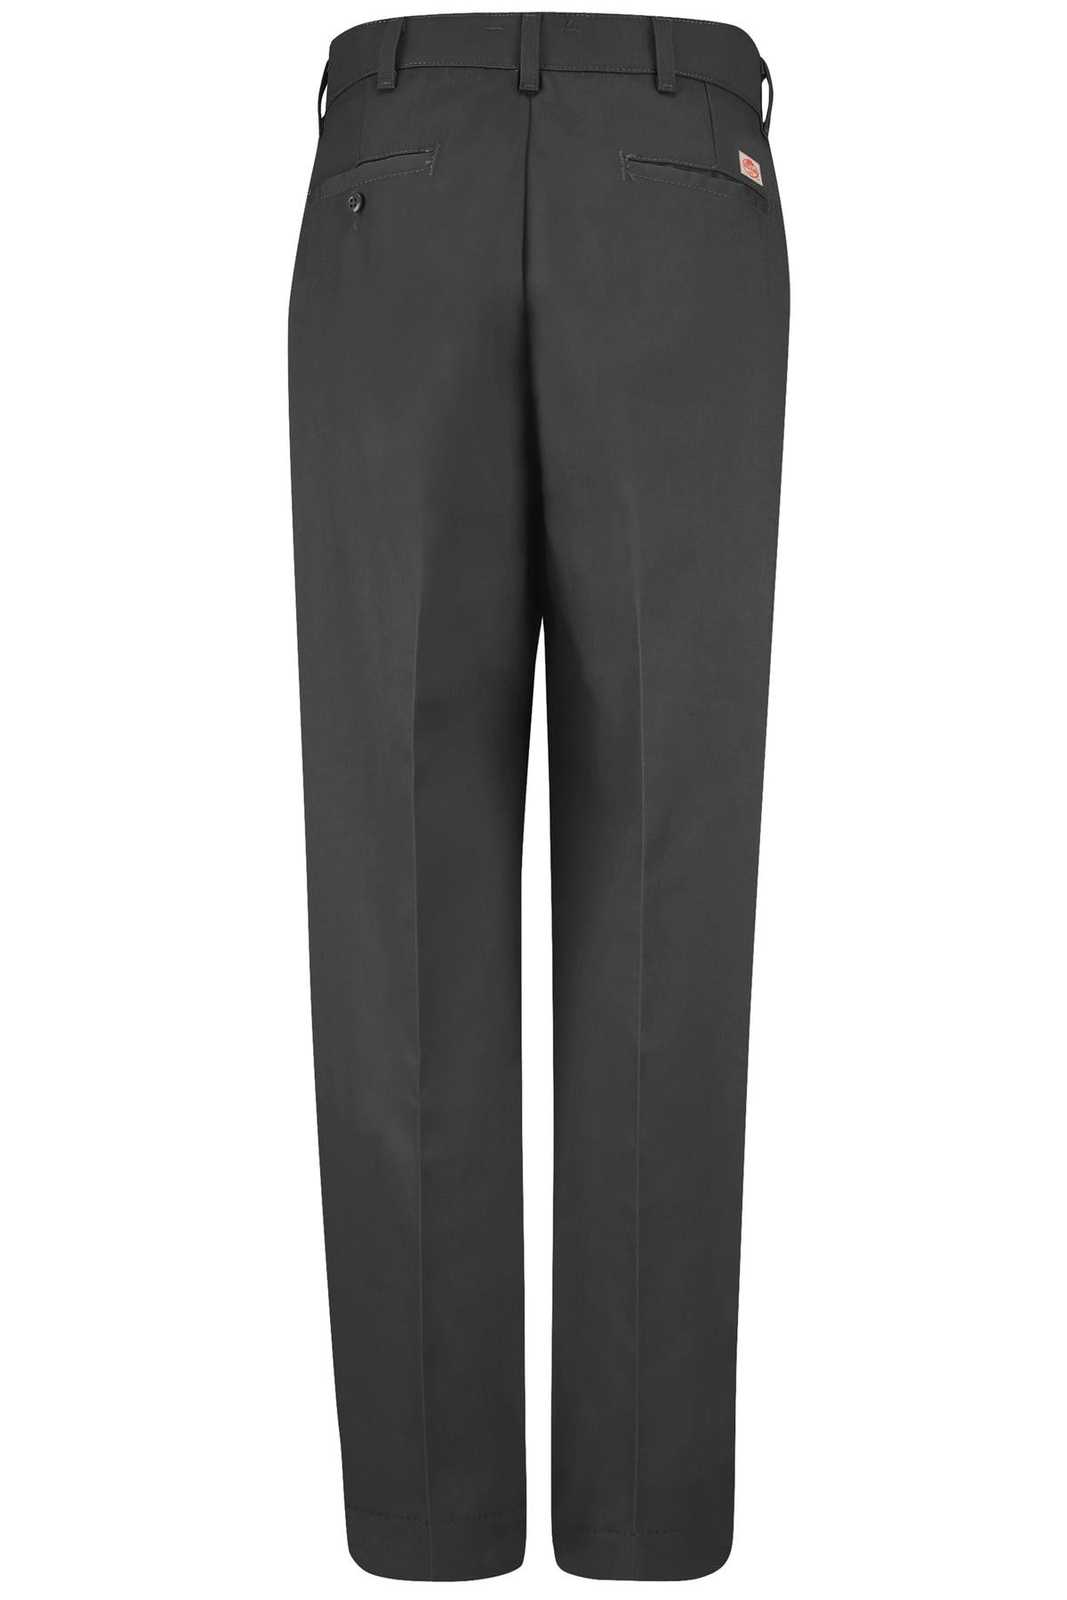 Red Kap PT20 Industrial Work Pant - Charcoal - HIT a Double - 3